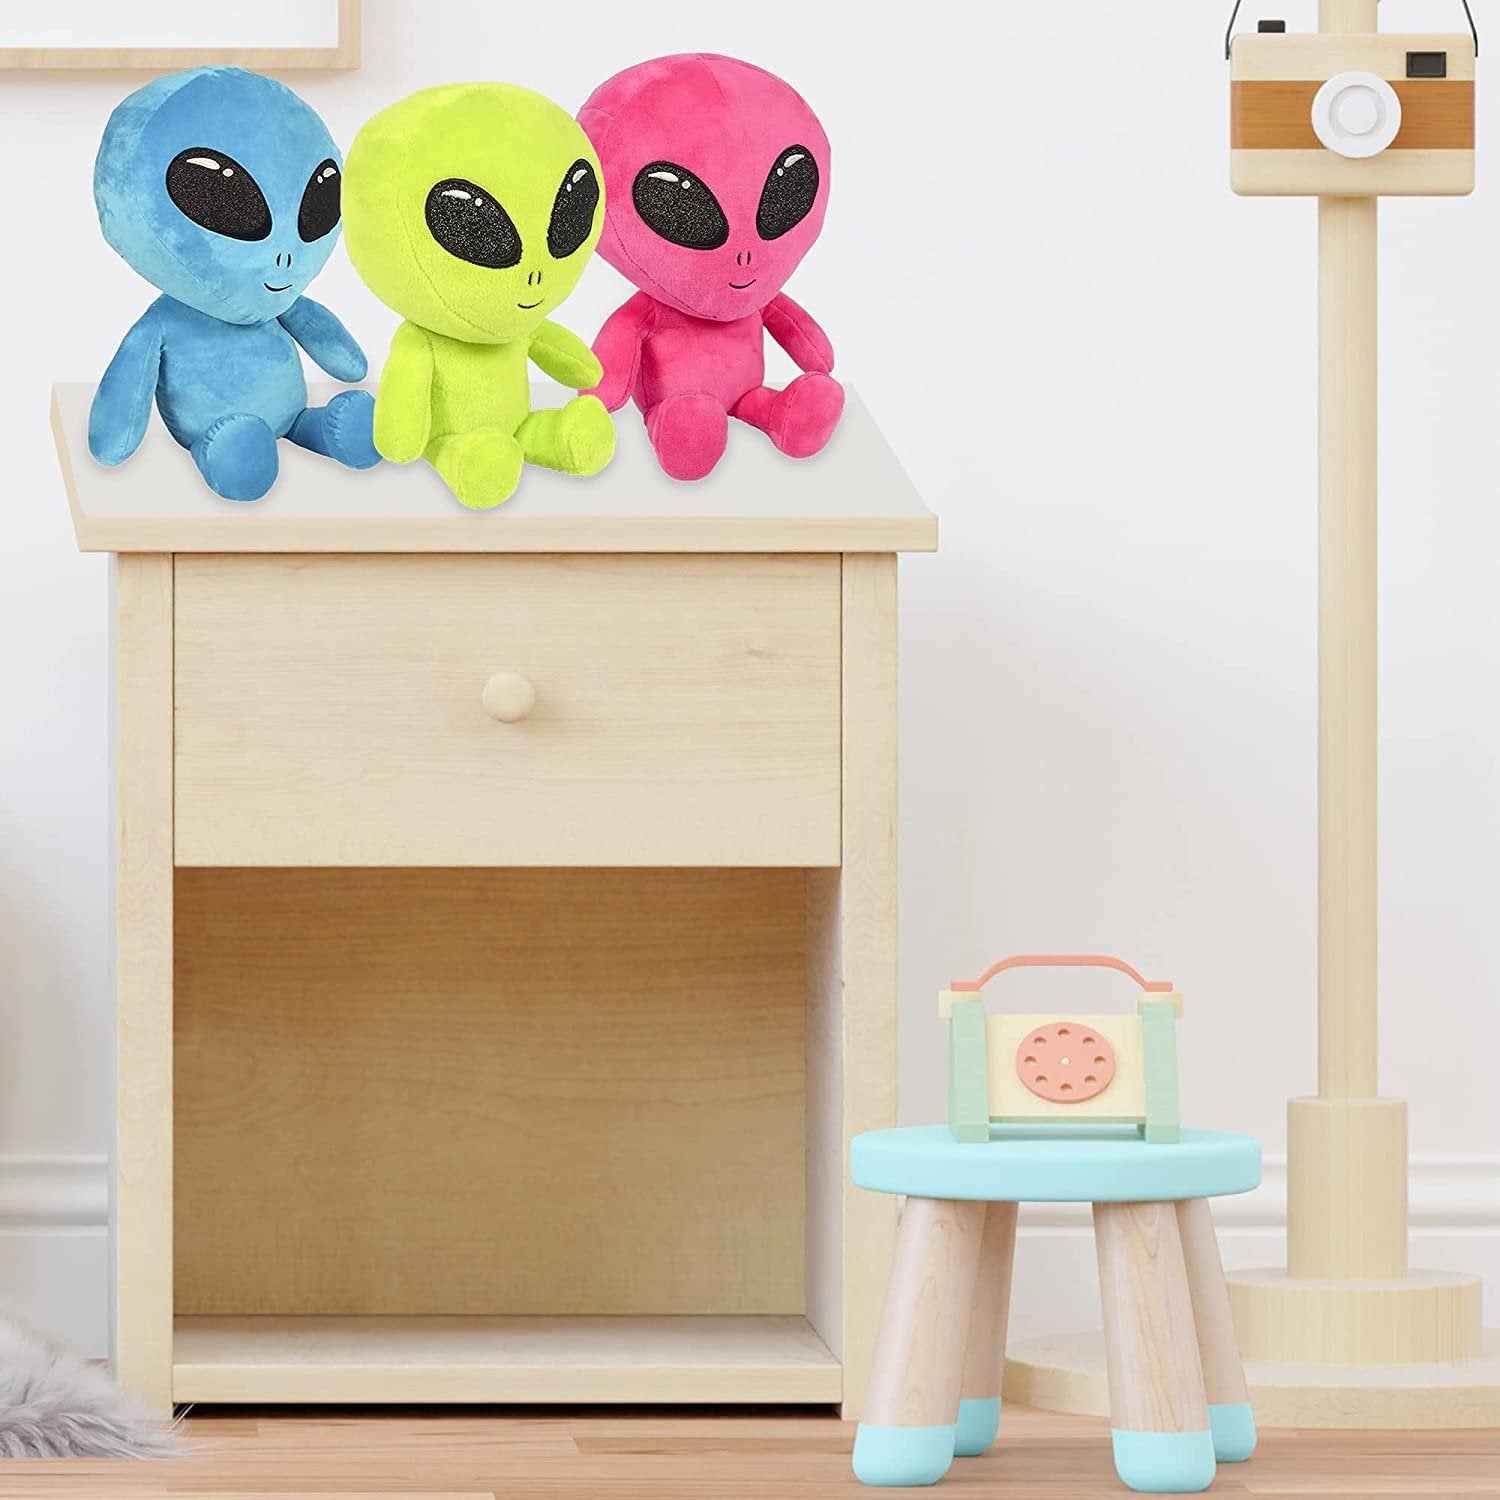 Plush Alien Stuffed Toys for Kids, Set of 3, Super Soft Stuffed Space Toys in Vibrant Colors, Galaxy Party Decorations, Outer Space Party Favors, Huggable Space Alien Gifts for Kids